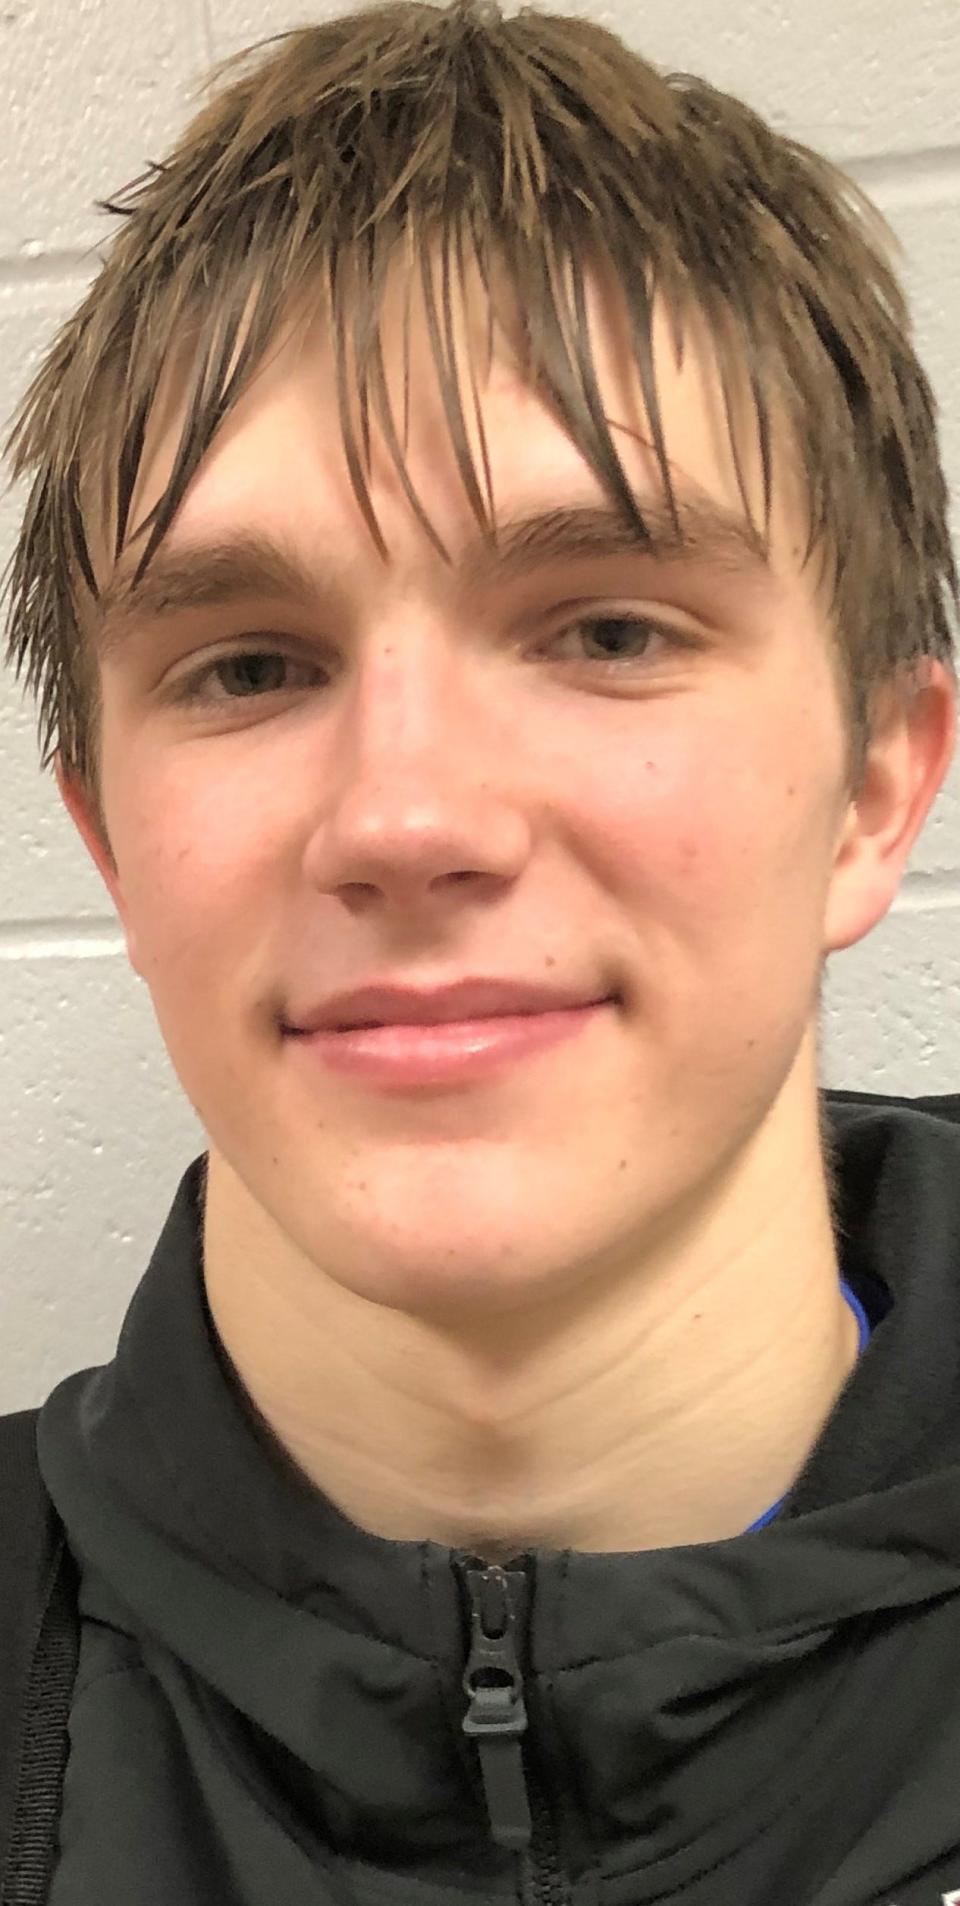 Newark senior Drew Oberholtzer grabbed a key offensive rebound, was fouled and made two foul shots, putting the Wildcats ahead for good in a 52-49 win at Olentangy Berlin.